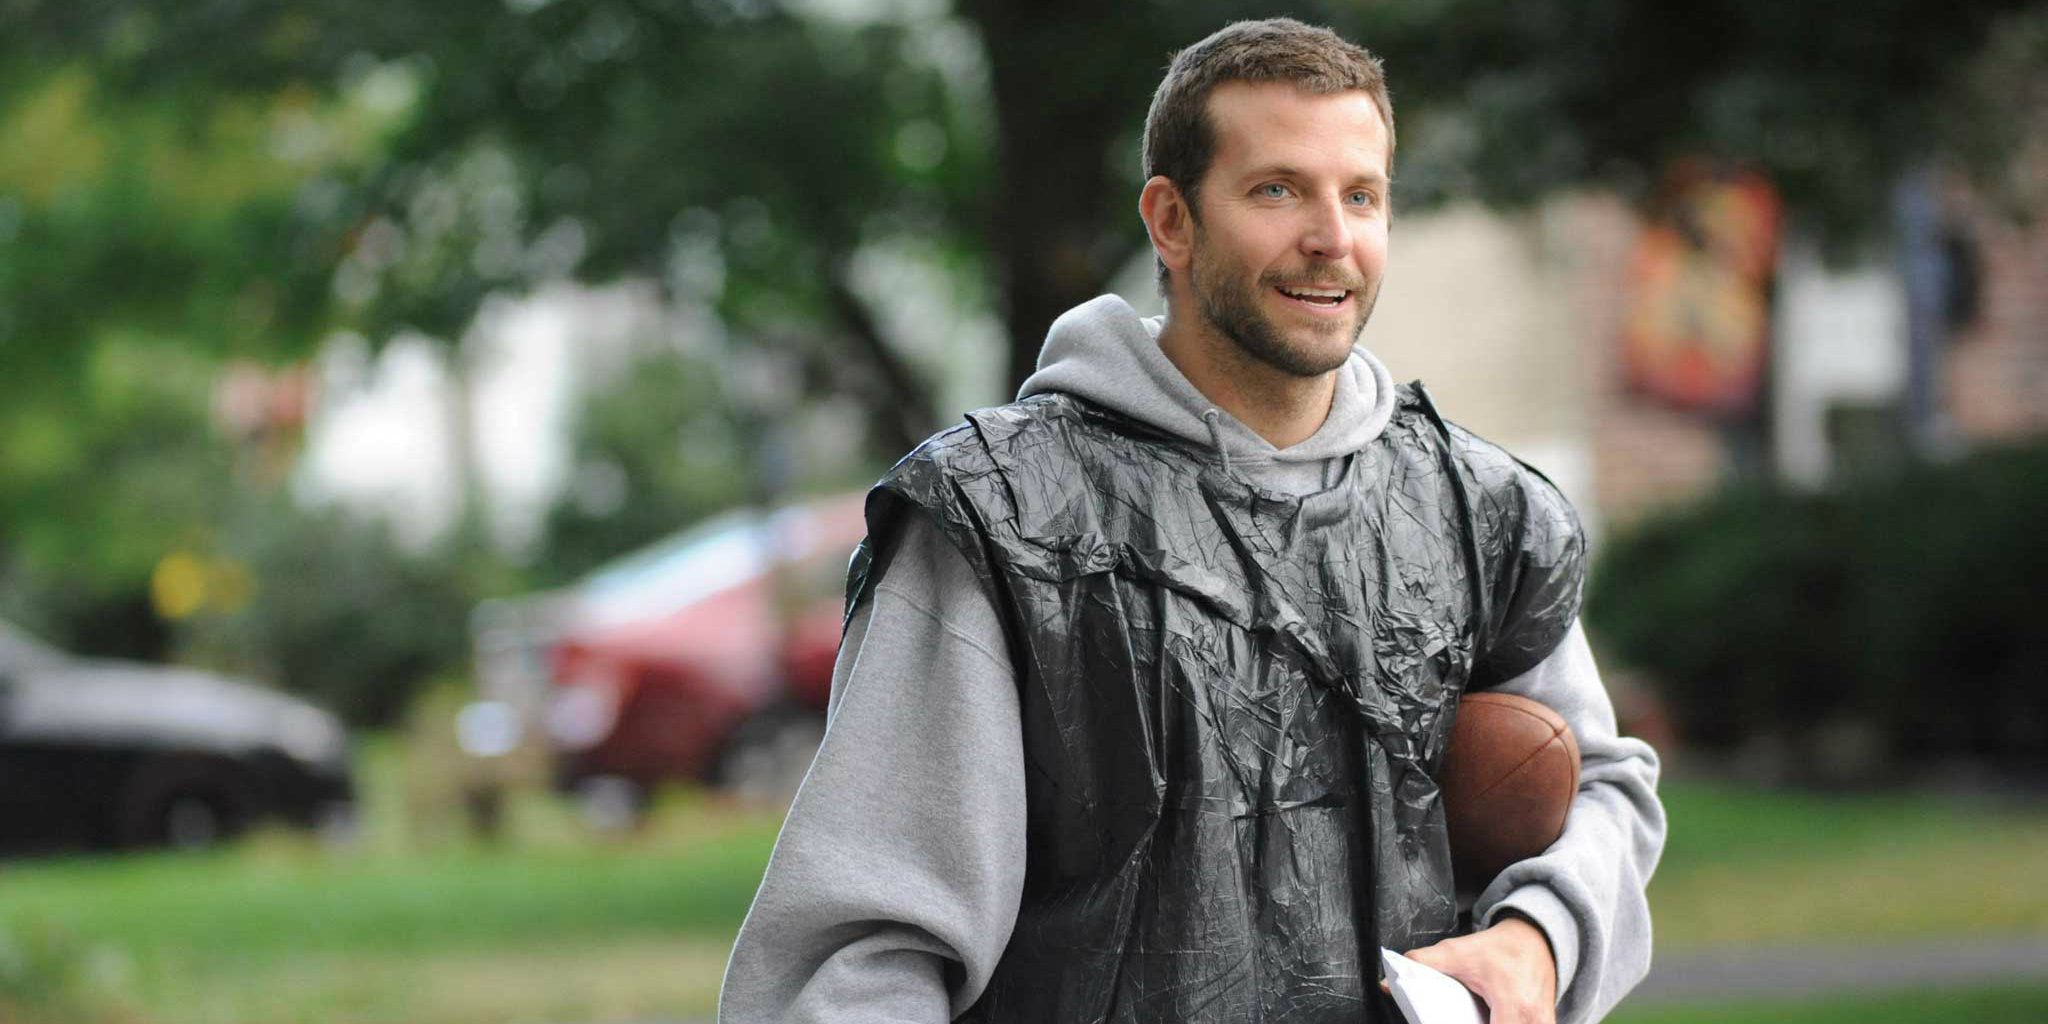 Bradley Cooper wearing a trash bag and holding a football in Silver Linings Playbook.